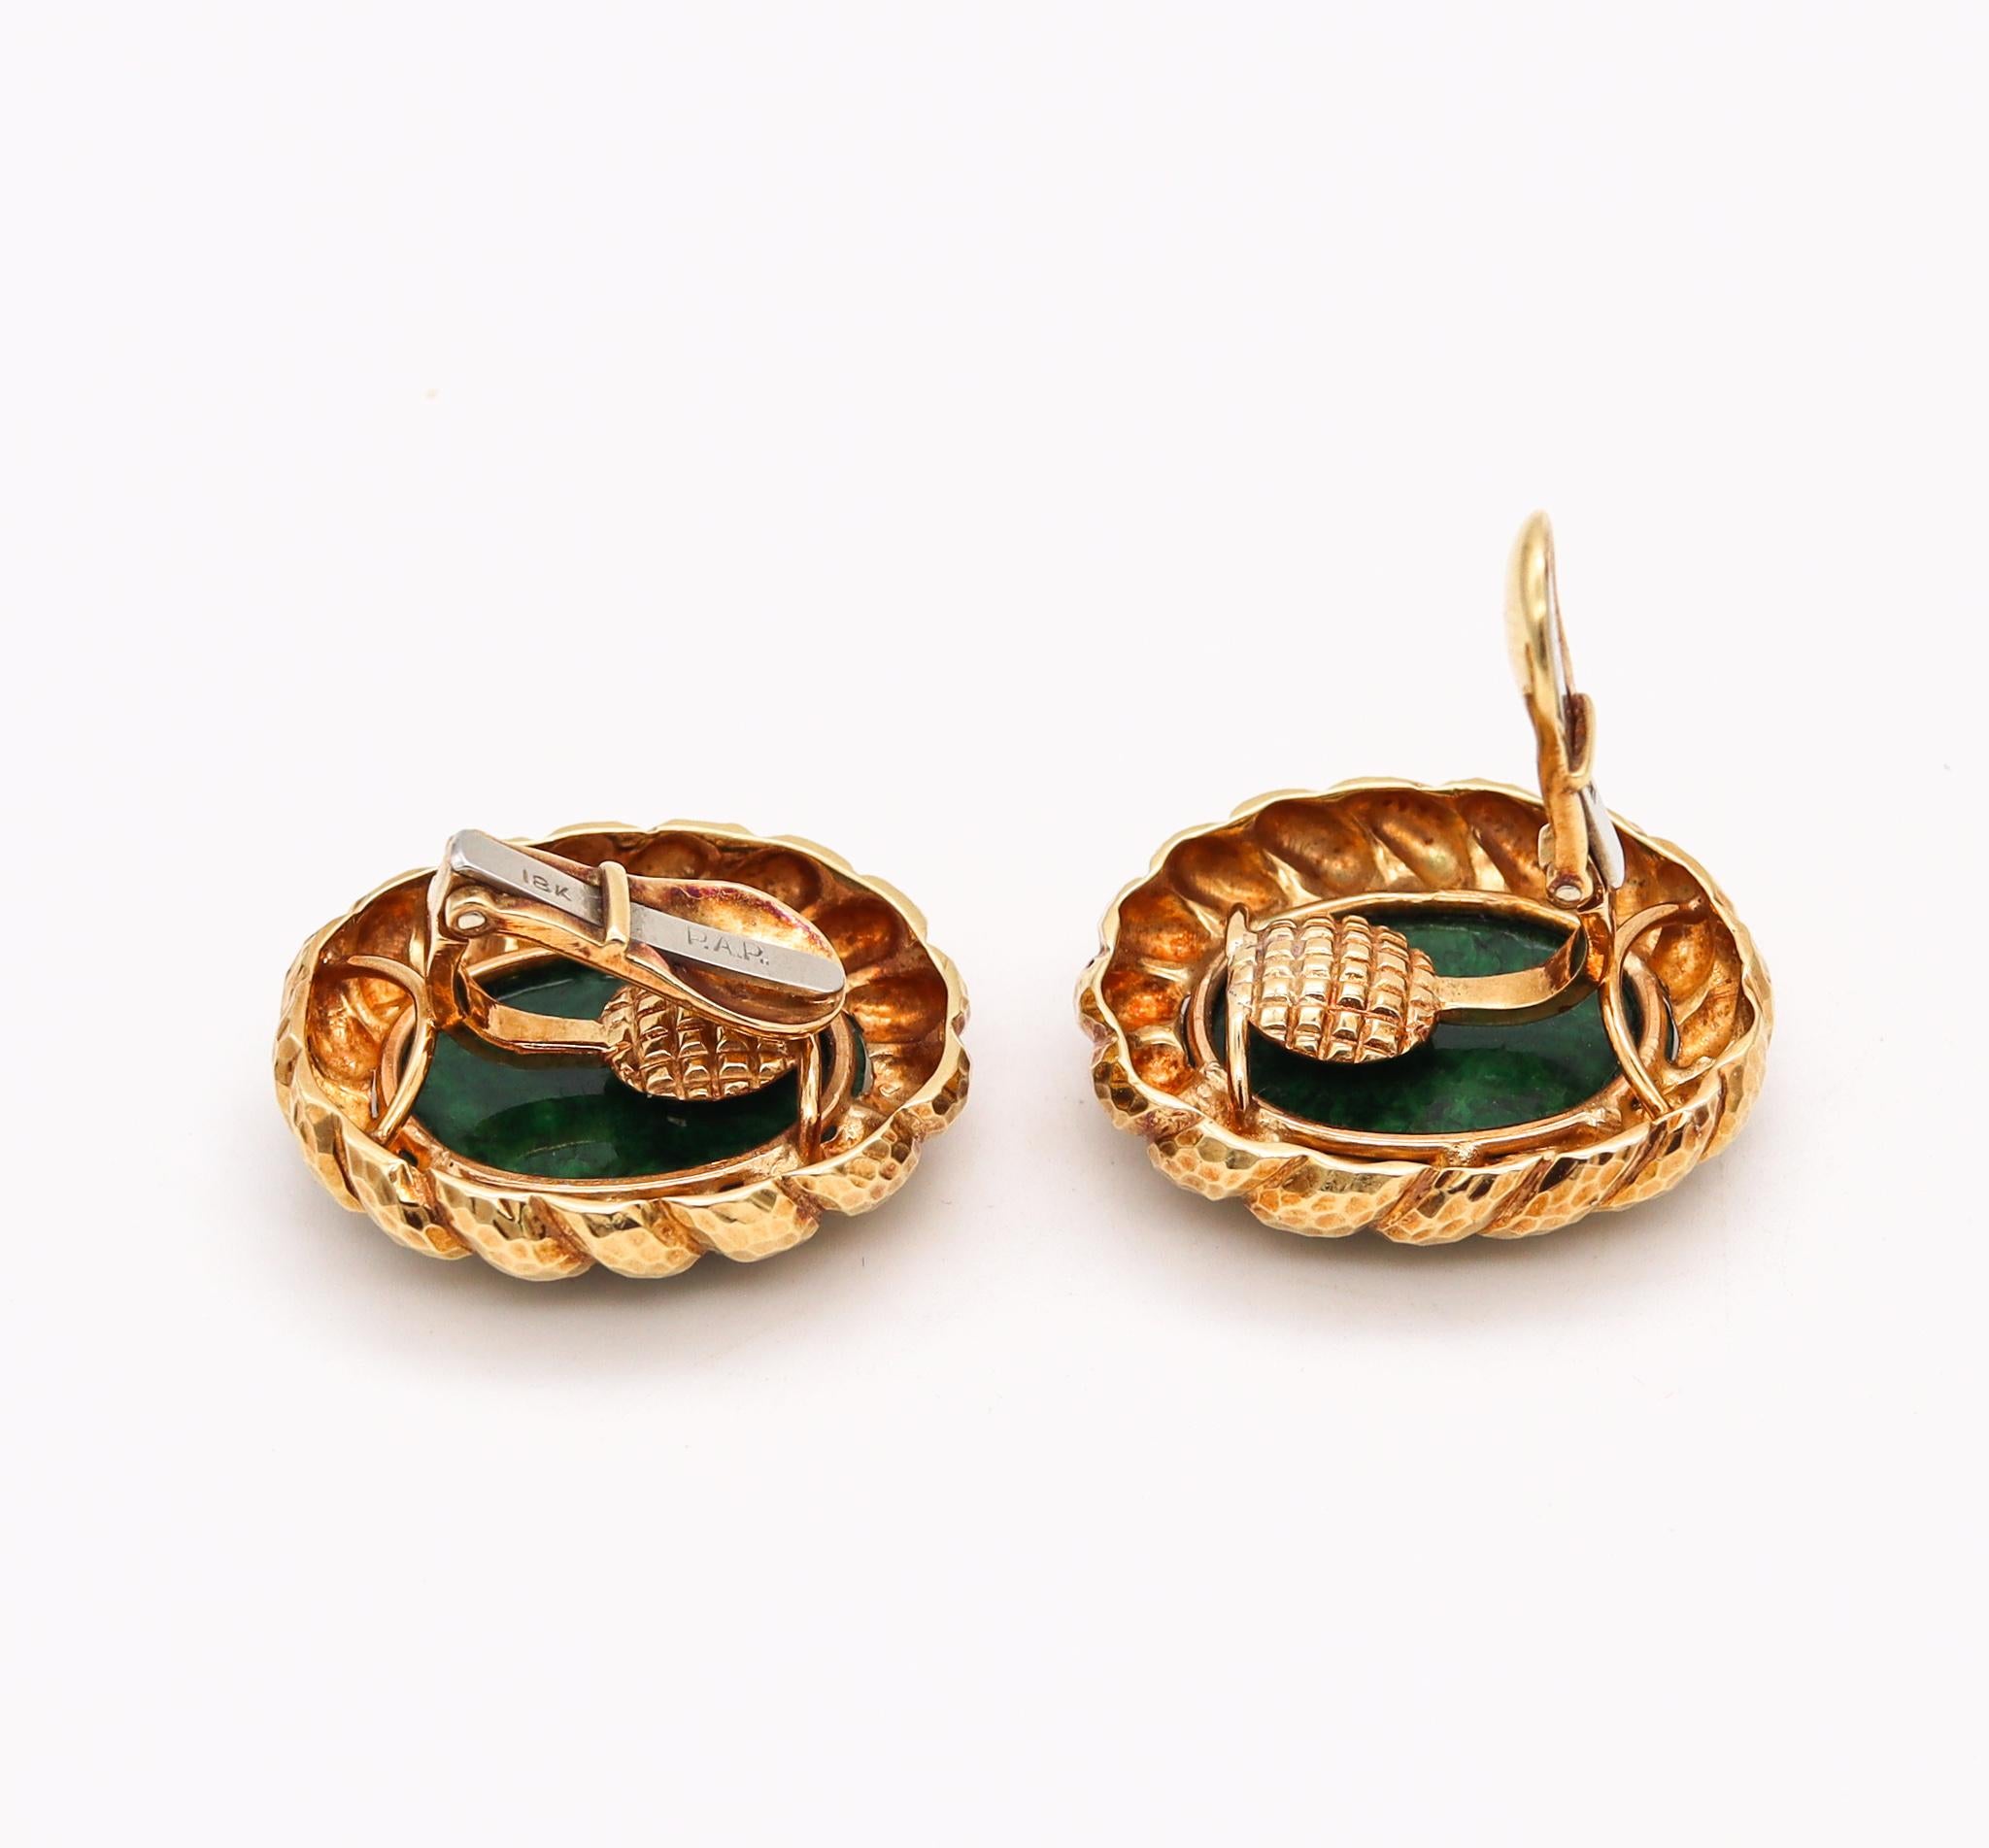 Cabochon Modernist 1970 Clip-On Earrings in 18Kt Yellow Gold 24.30 Ctw Maw Sit Sit Jade For Sale